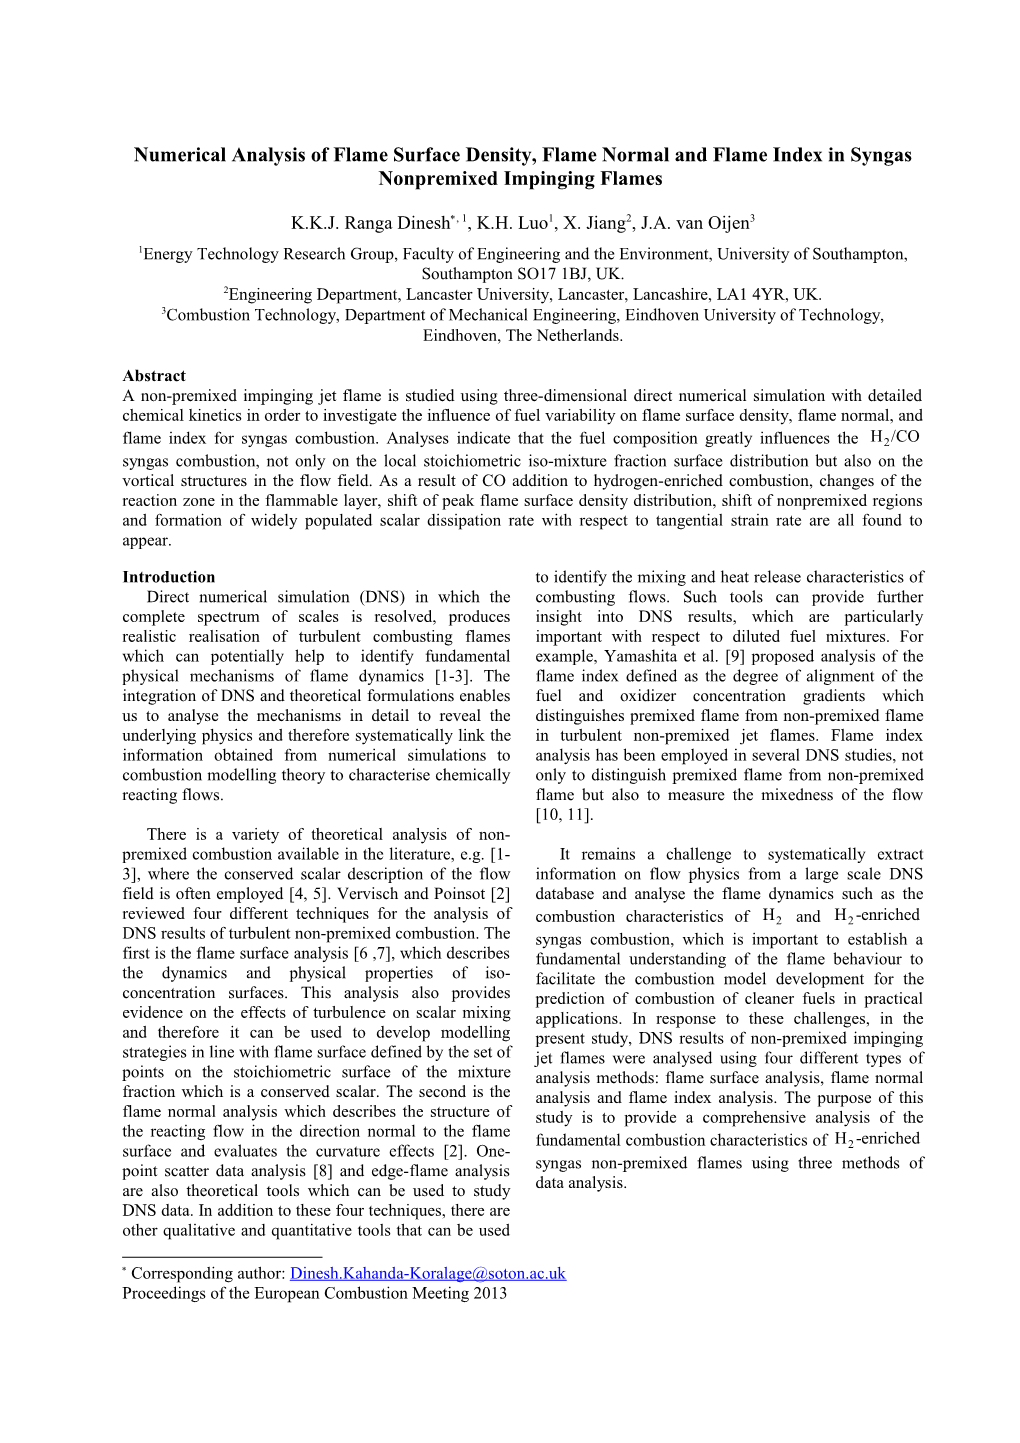 Papers for the European Combustion Meeting 2003